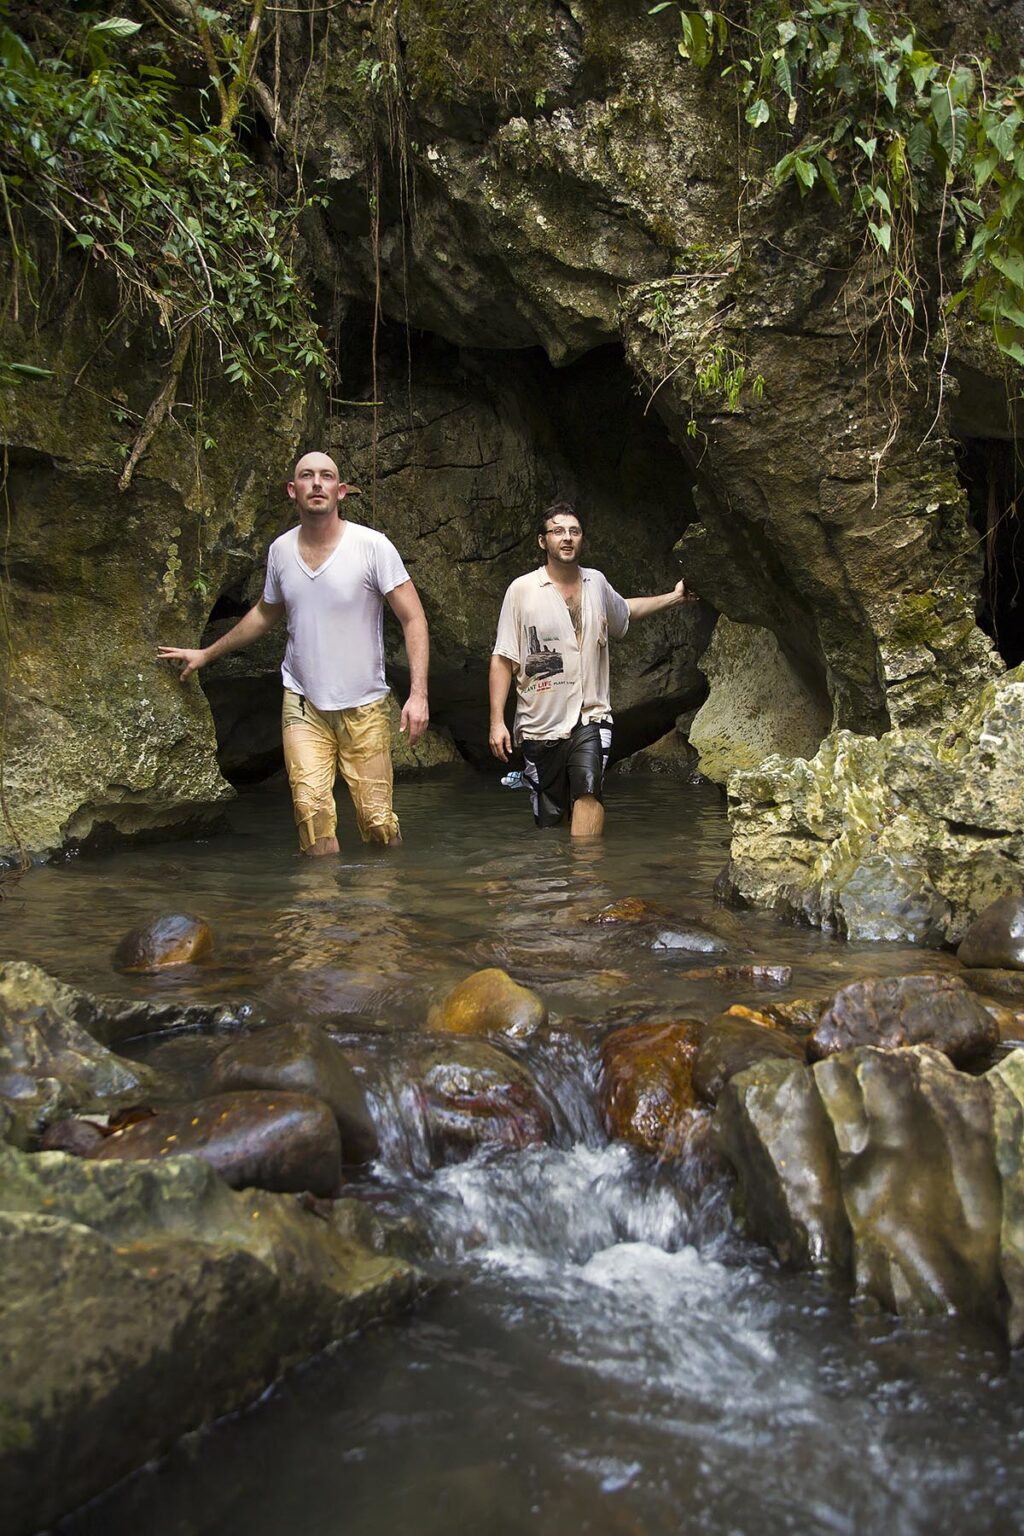 BODHI GARRETT and AUSTIN LOVELL emerge from a water CAVE adventure in KHAO SOK NATIONAL PARK - SURATHANI PROVENCE, THAILAND  MR